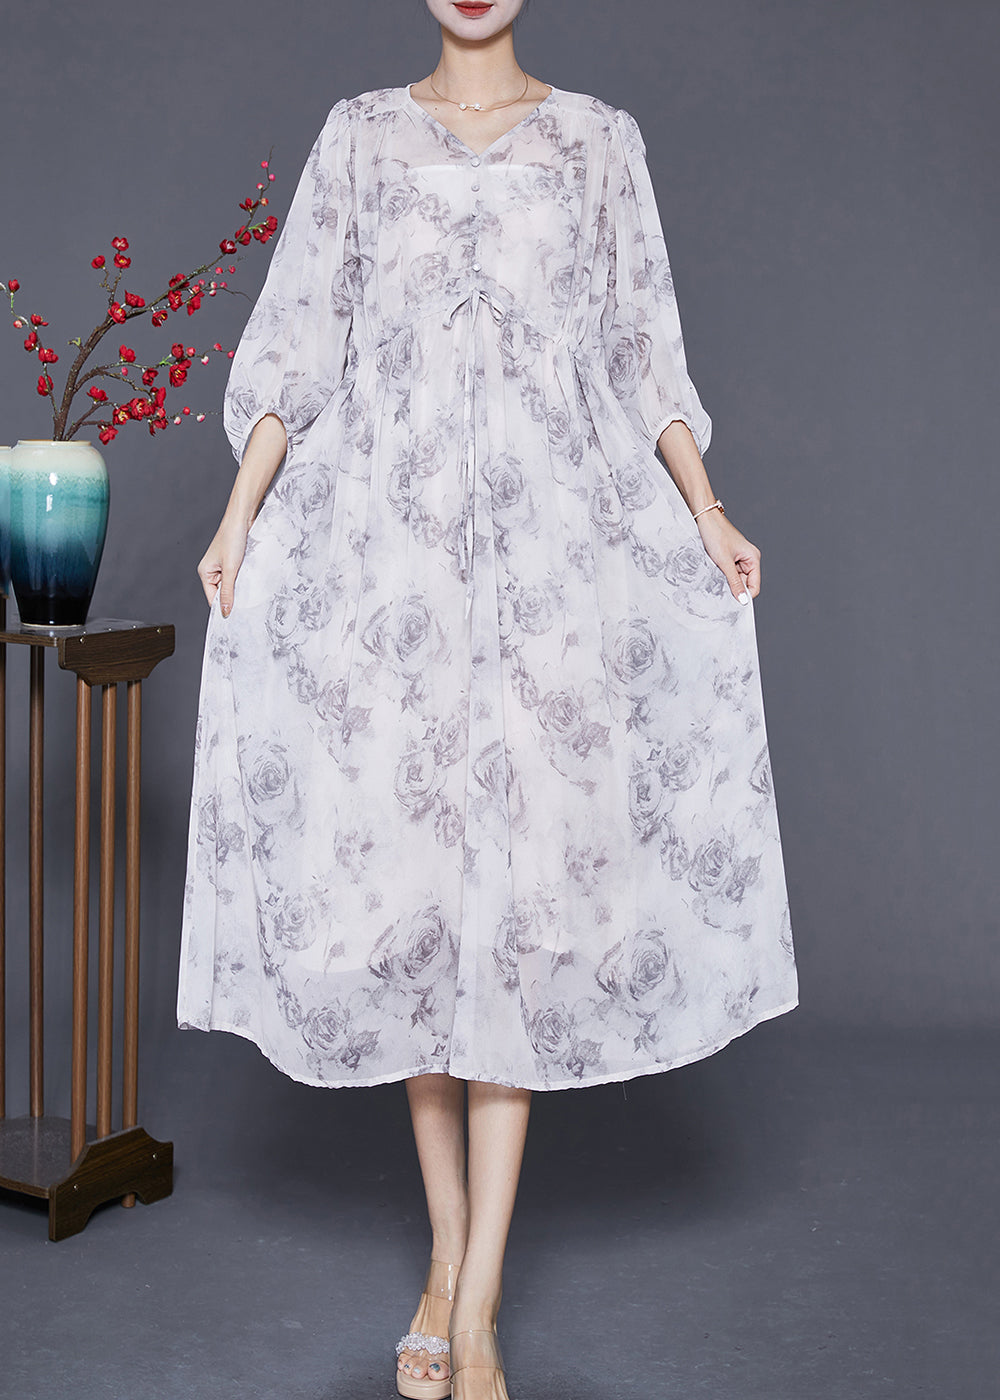 Women White Cinched Rose Print Chiffon Party Dress Summer